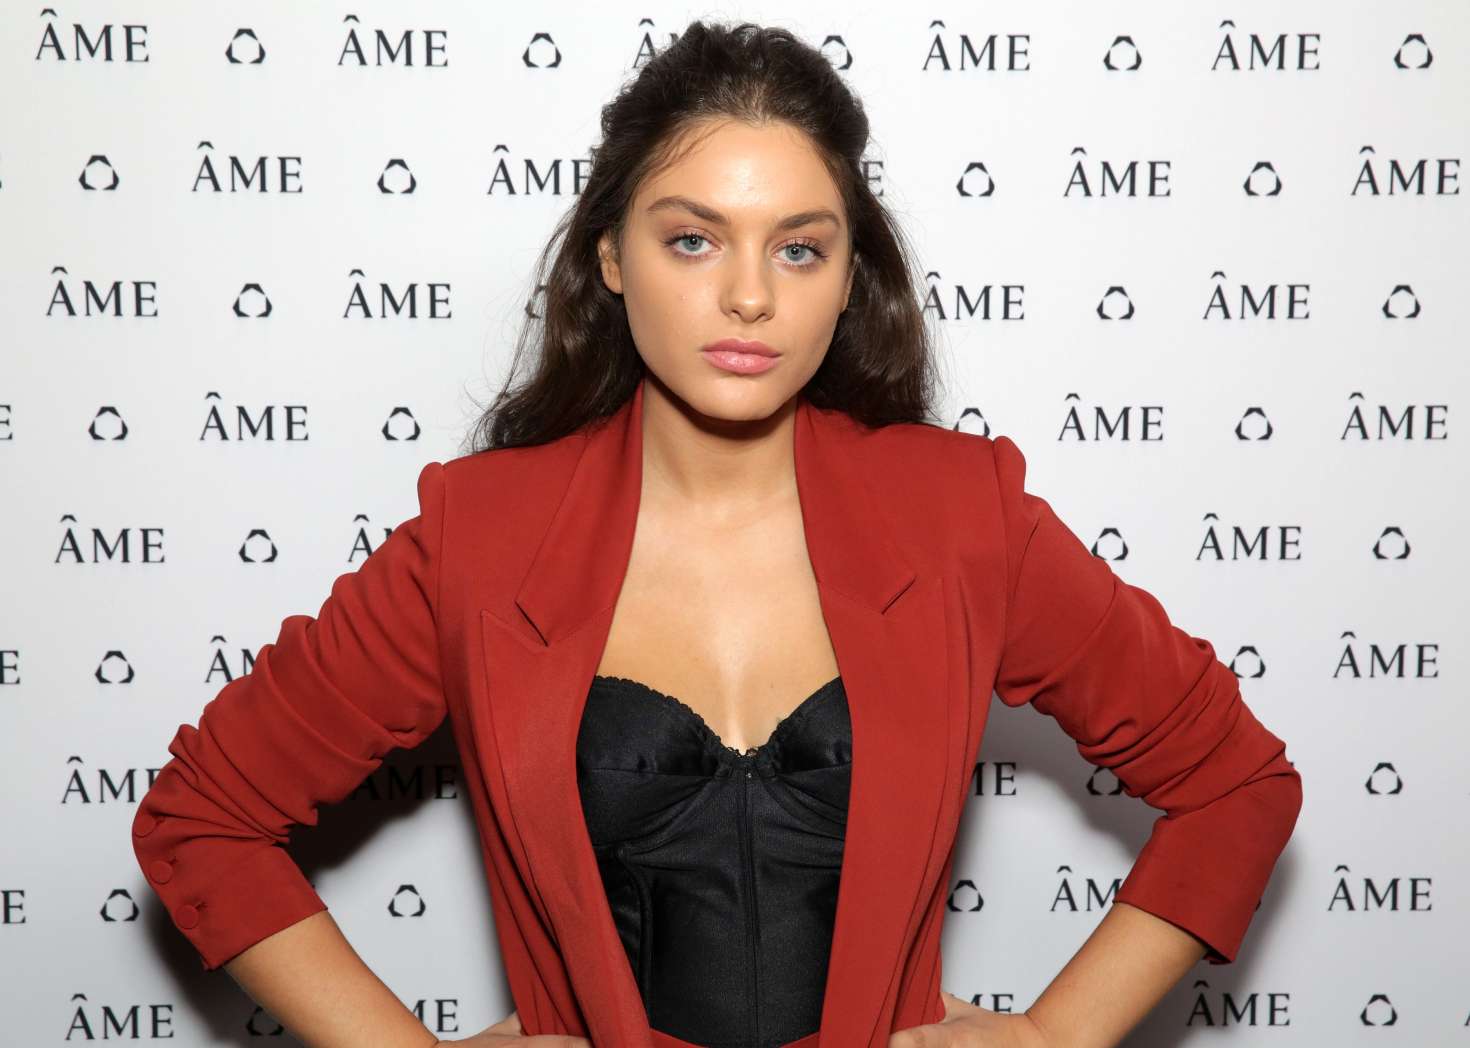 Odeya Rush â€“ Ame Jewelry Launch Event in Los Angeles